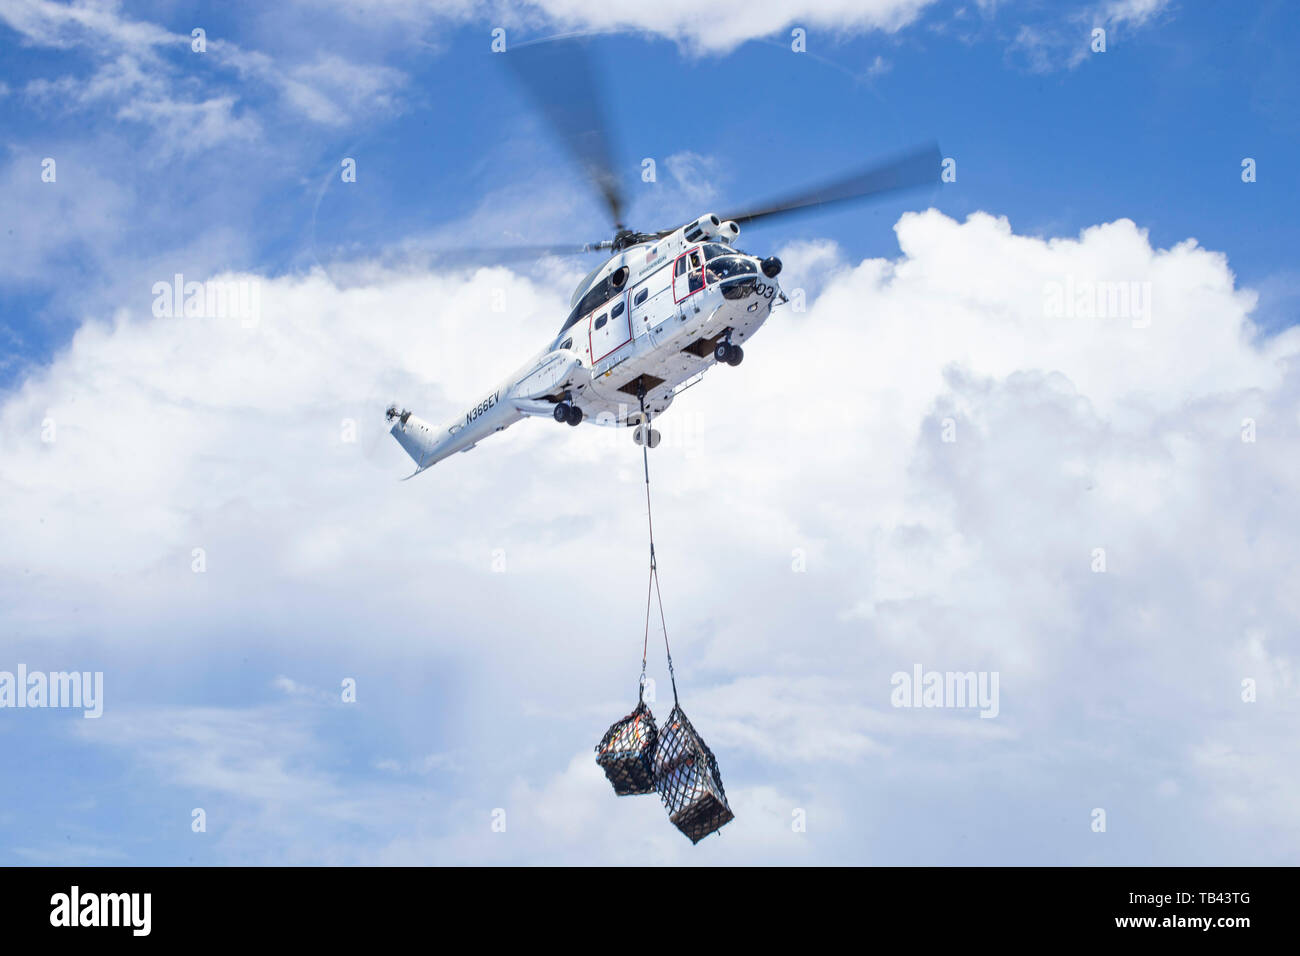 190527-M-EC058-0386 PACIFIC OCEAN (May 27, 2019) A Military Sealift Command SA-330J Puma helicopter sling-loads cargo during a vertical replenishment-at-sea. The Marines and Sailors of the 11th Marine Expeditionary Unit are deployed to the U.S. 7th Fleet area of operations to support regional stability, reassure partners and allies, and maintain a presence postured to respond to any crisis ranging from humanitarian assistance to contingency operations (U.S. Marine Corps photo by Lance Cpl. Dalton S. Swanbeck) Stock Photo